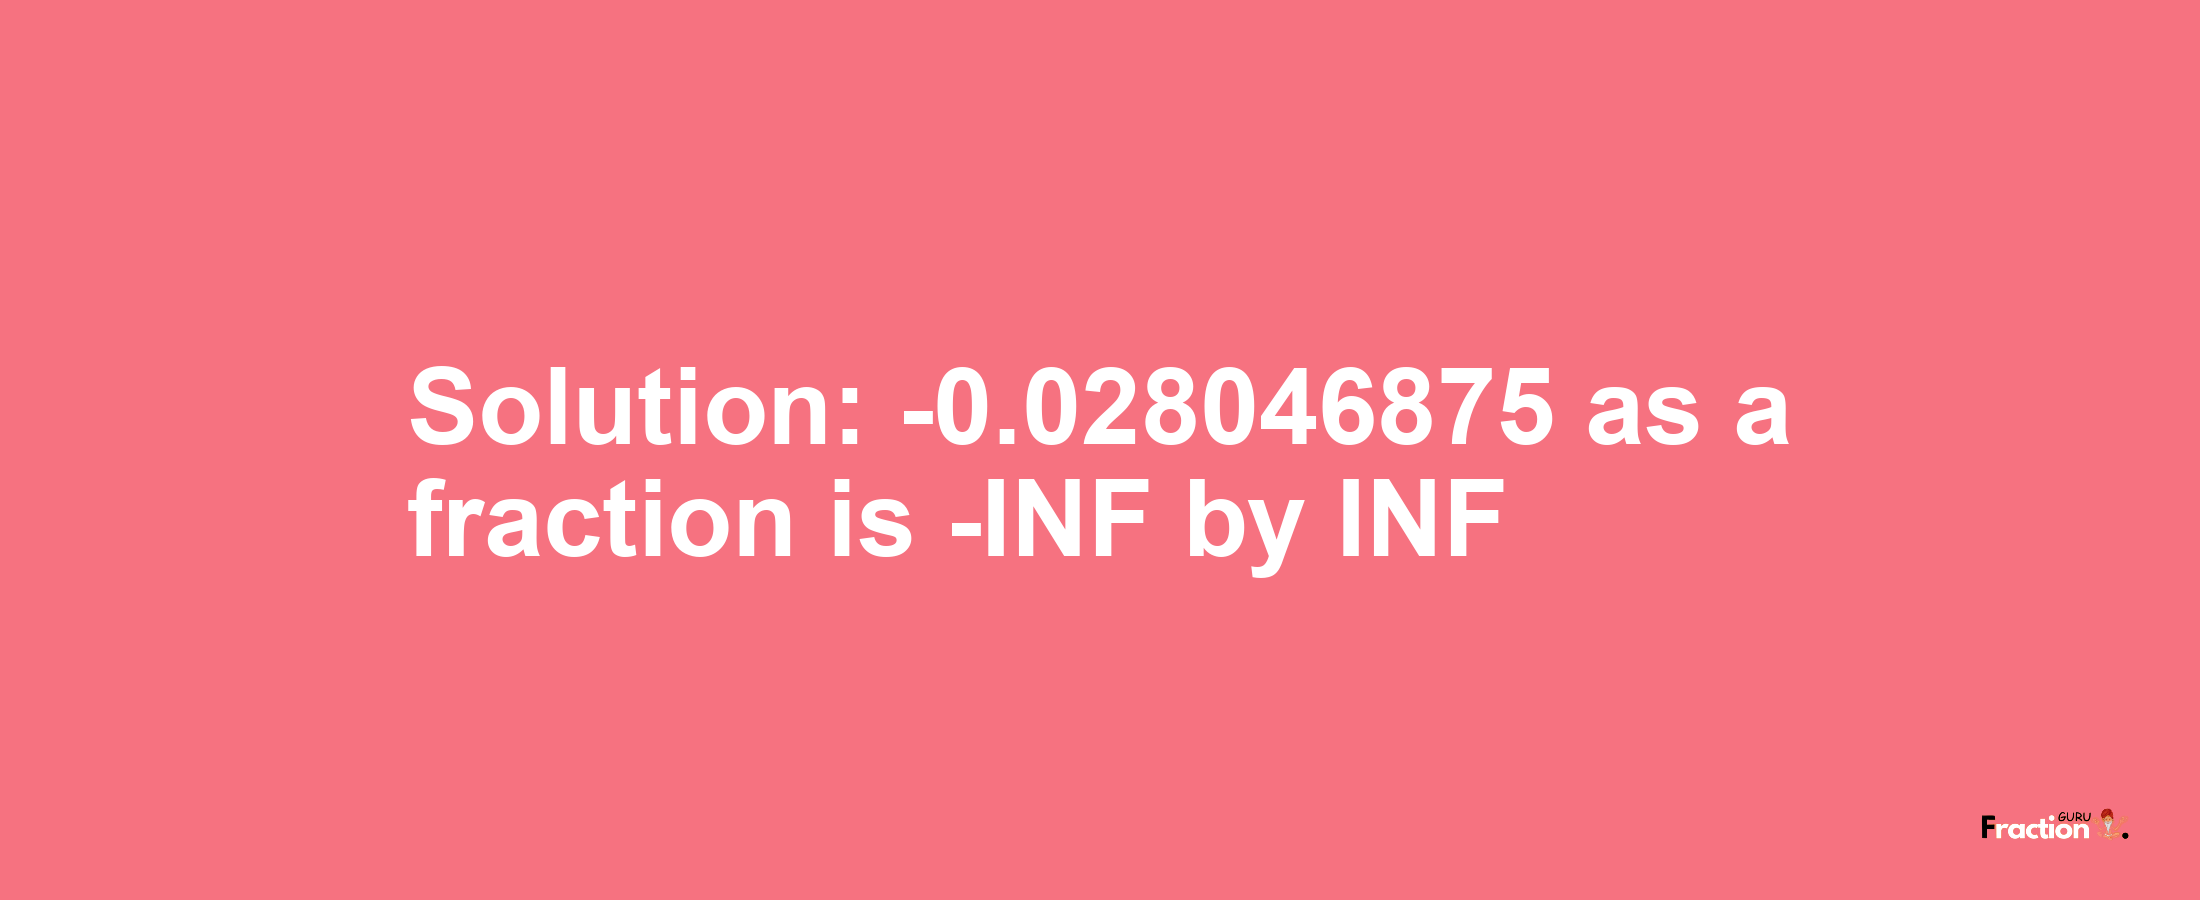 Solution:-0.028046875 as a fraction is -INF/INF